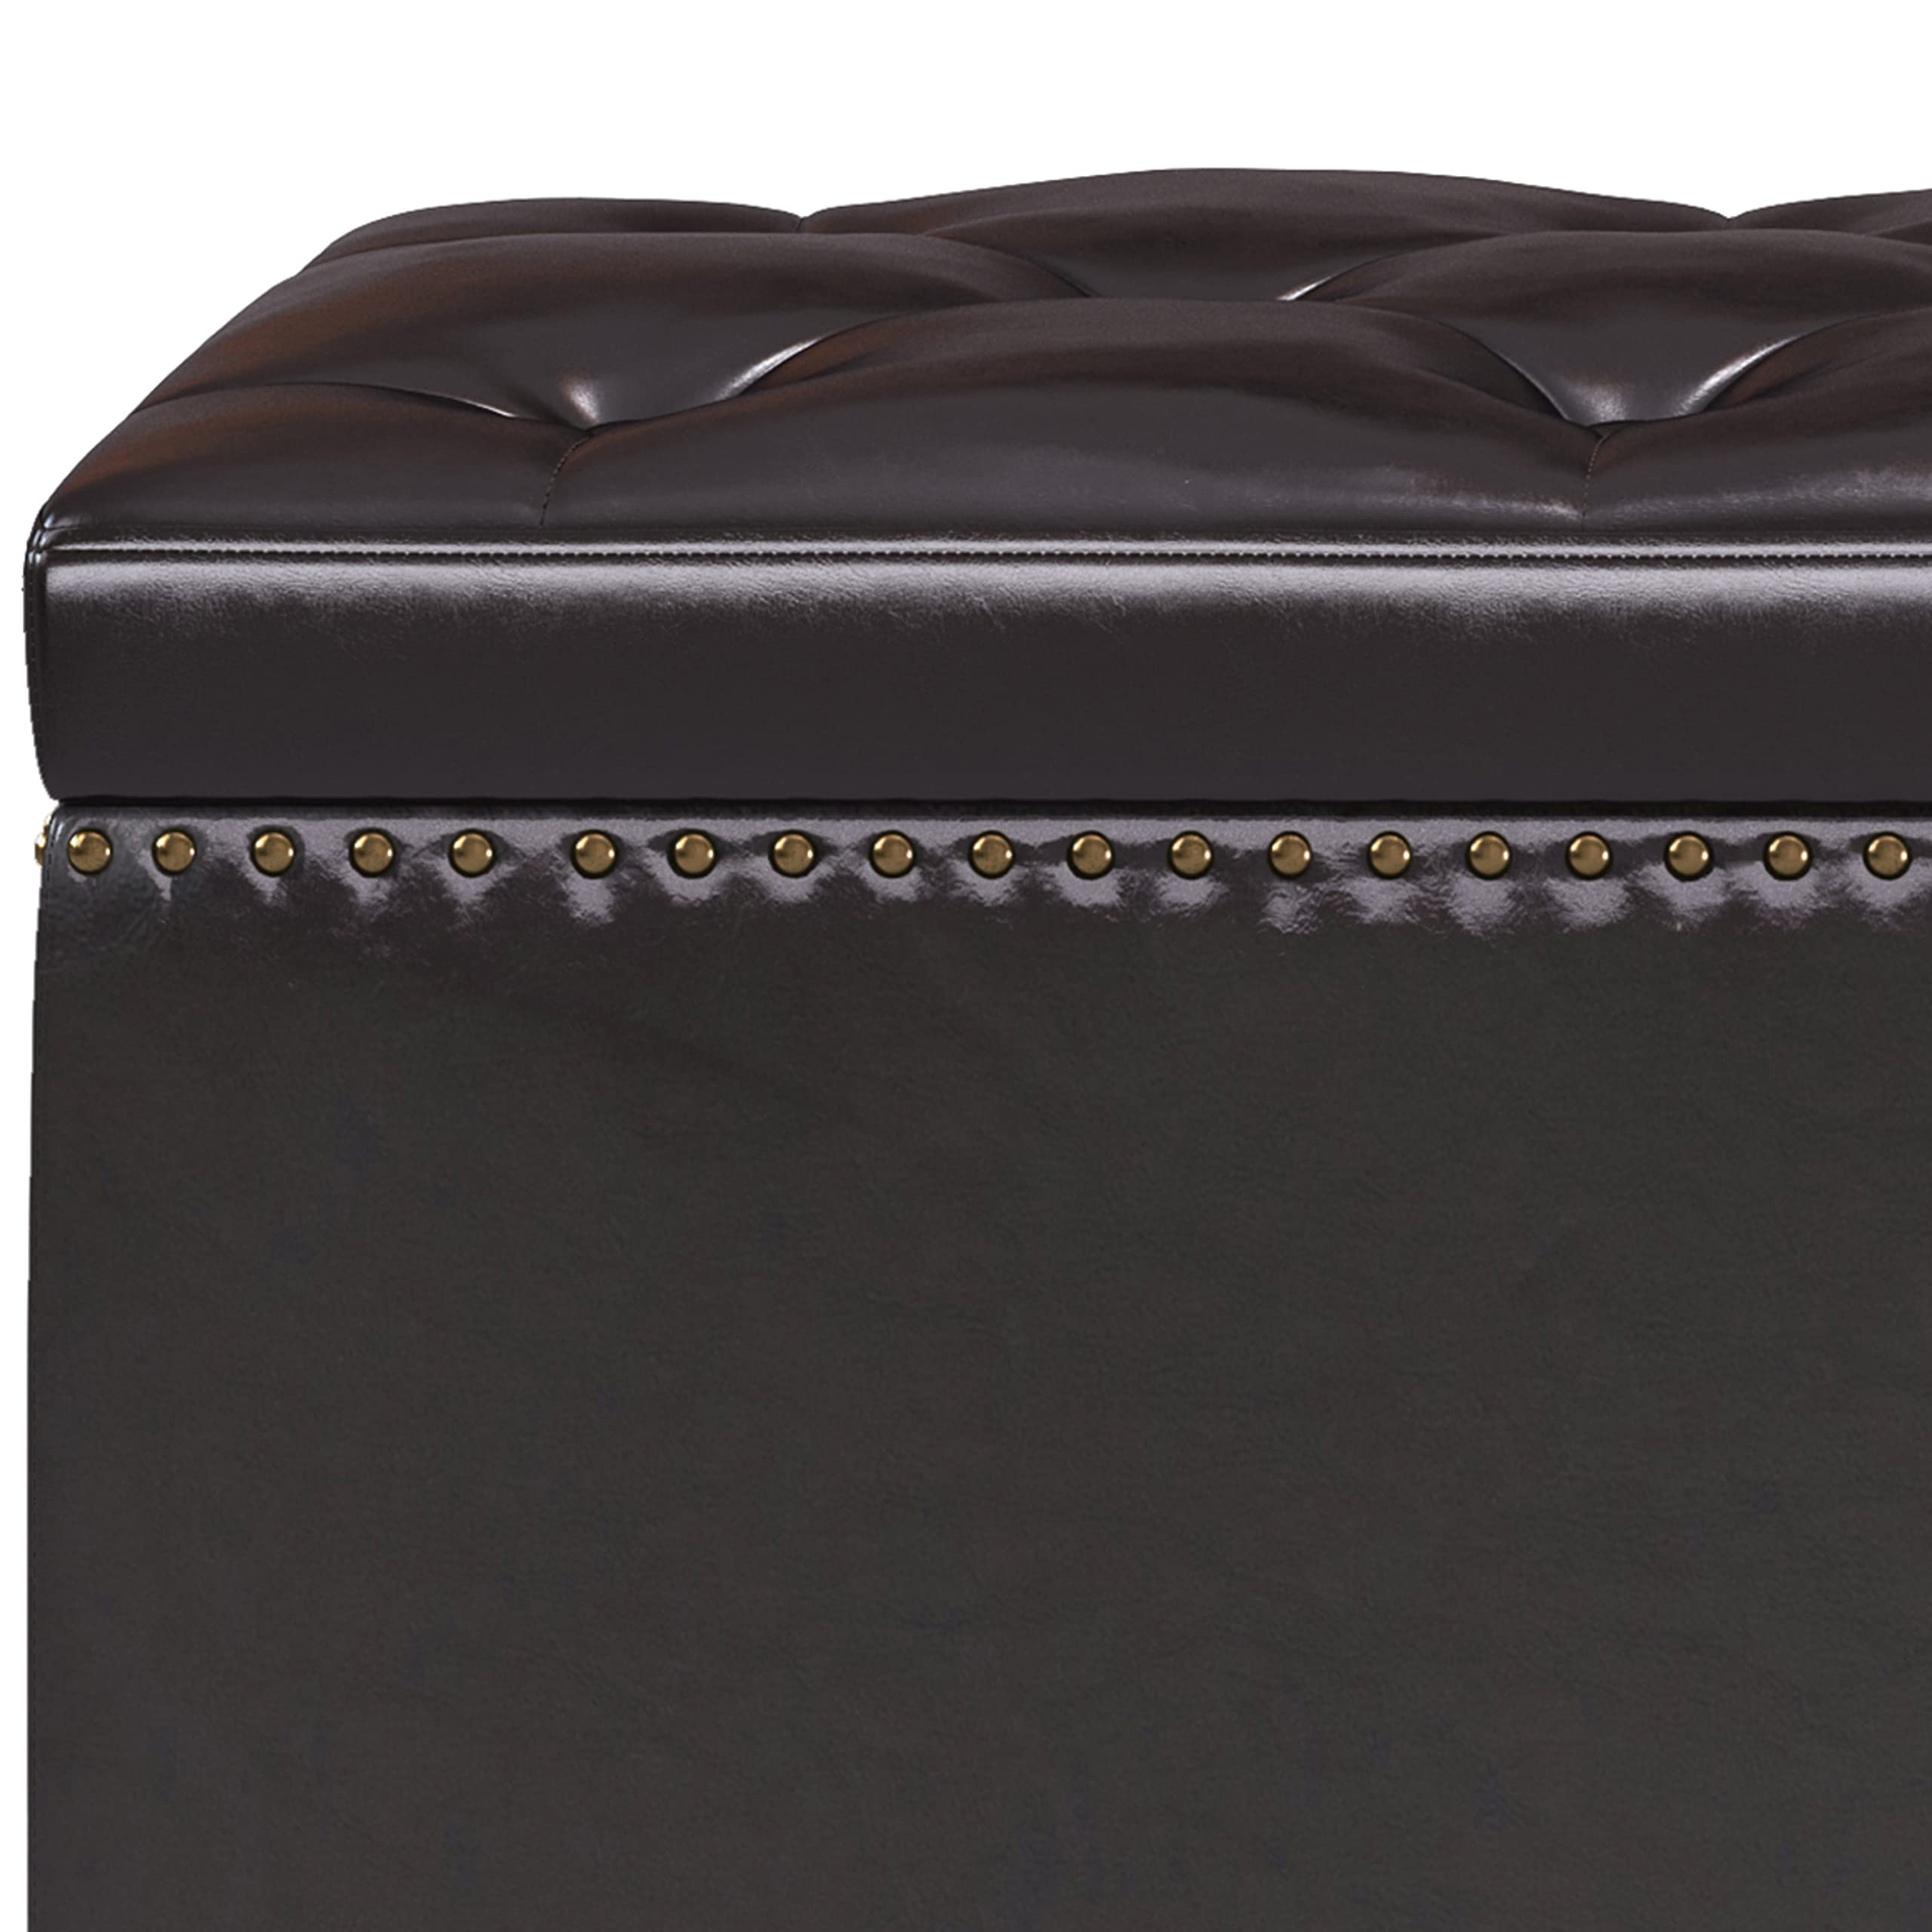 SIMPLIHOME Heatherton 48 Inch Wide Traditional Rectangle Storage Ottoman in Tanners Brown Vegan Faux Leather, For the Living Room and Bedroom